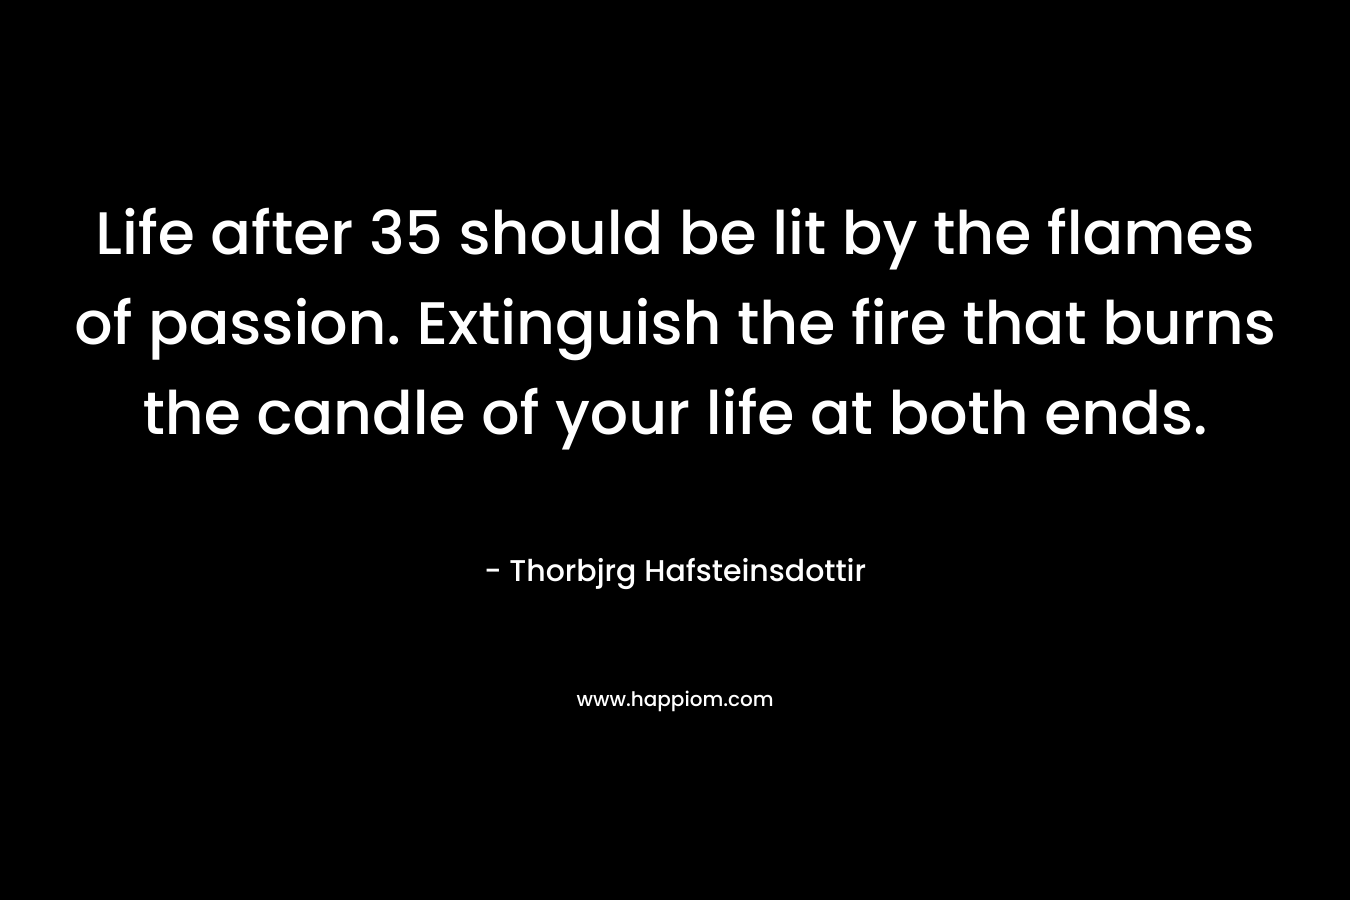 Life after 35 should be lit by the flames of passion. Extinguish the fire that burns the candle of your life at both ends.